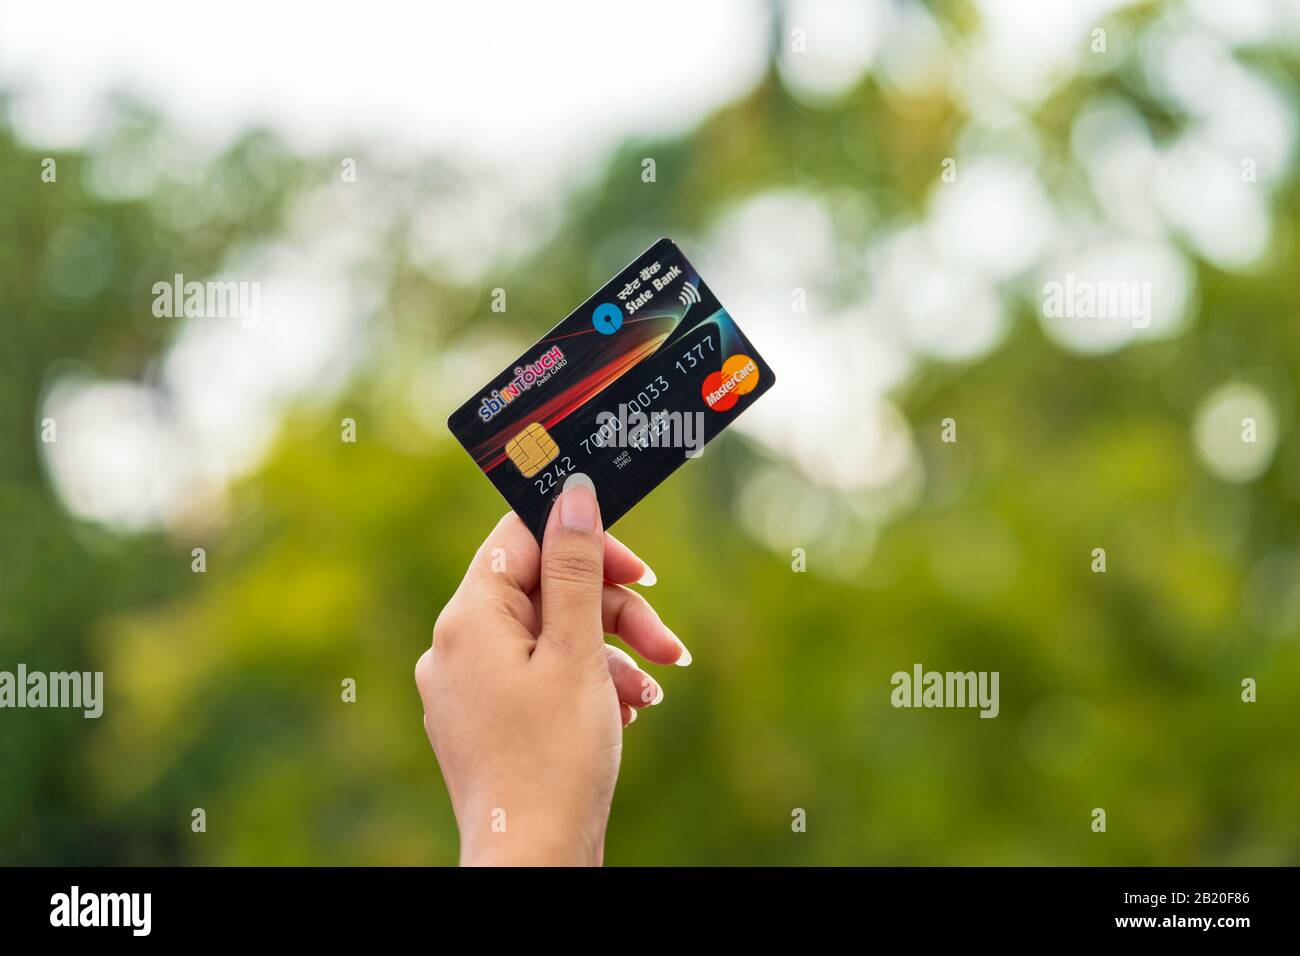 Young woman holding or showing State Bank of India's Credit or Debit card at outdoor background. Cocnept for SBI cards IPO, payment, finanace, Stock Photo